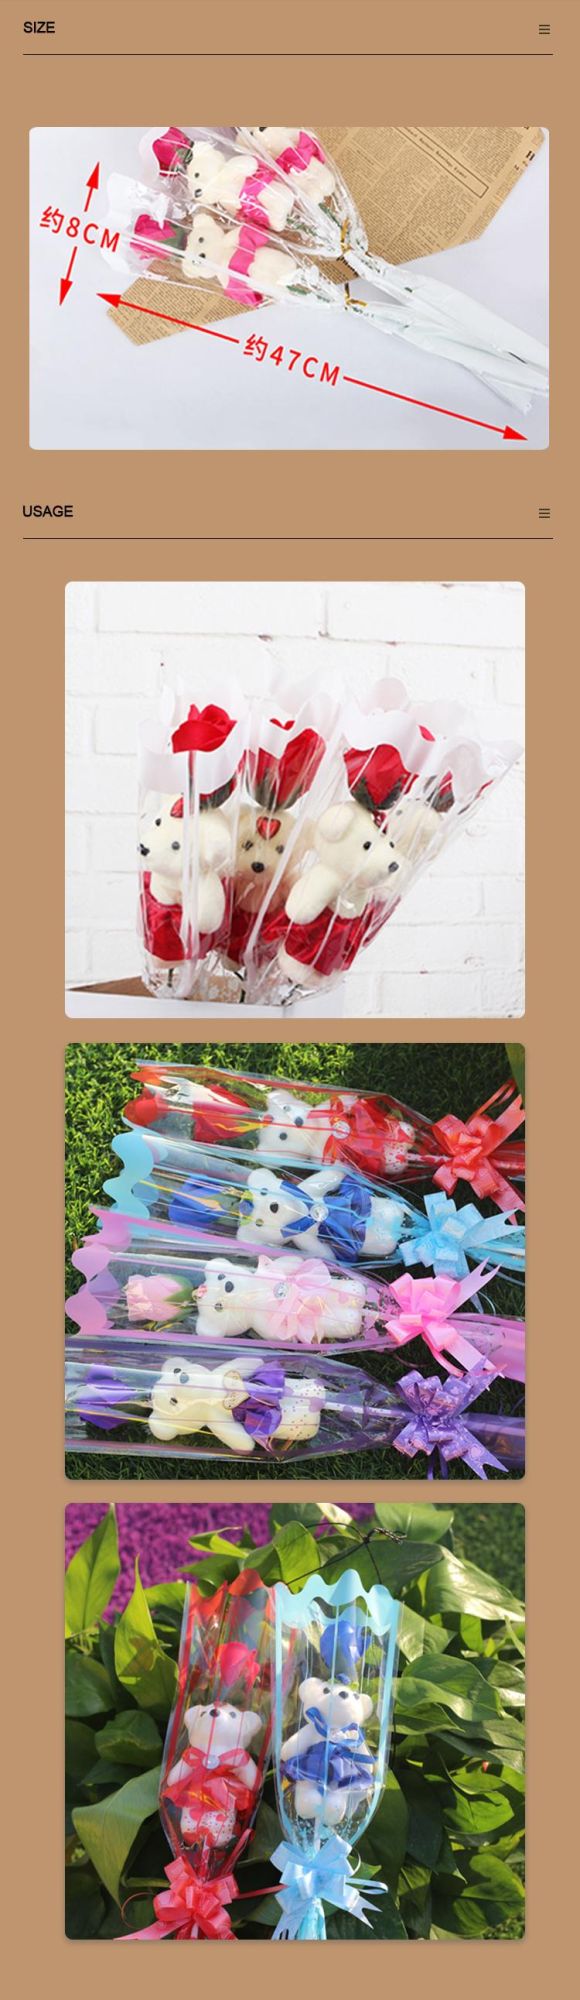 Wholesale Soap Rose Flower Bouquet with Teddy Bear for Christmas, Valentine′s Day, Mother′s Day Gifts